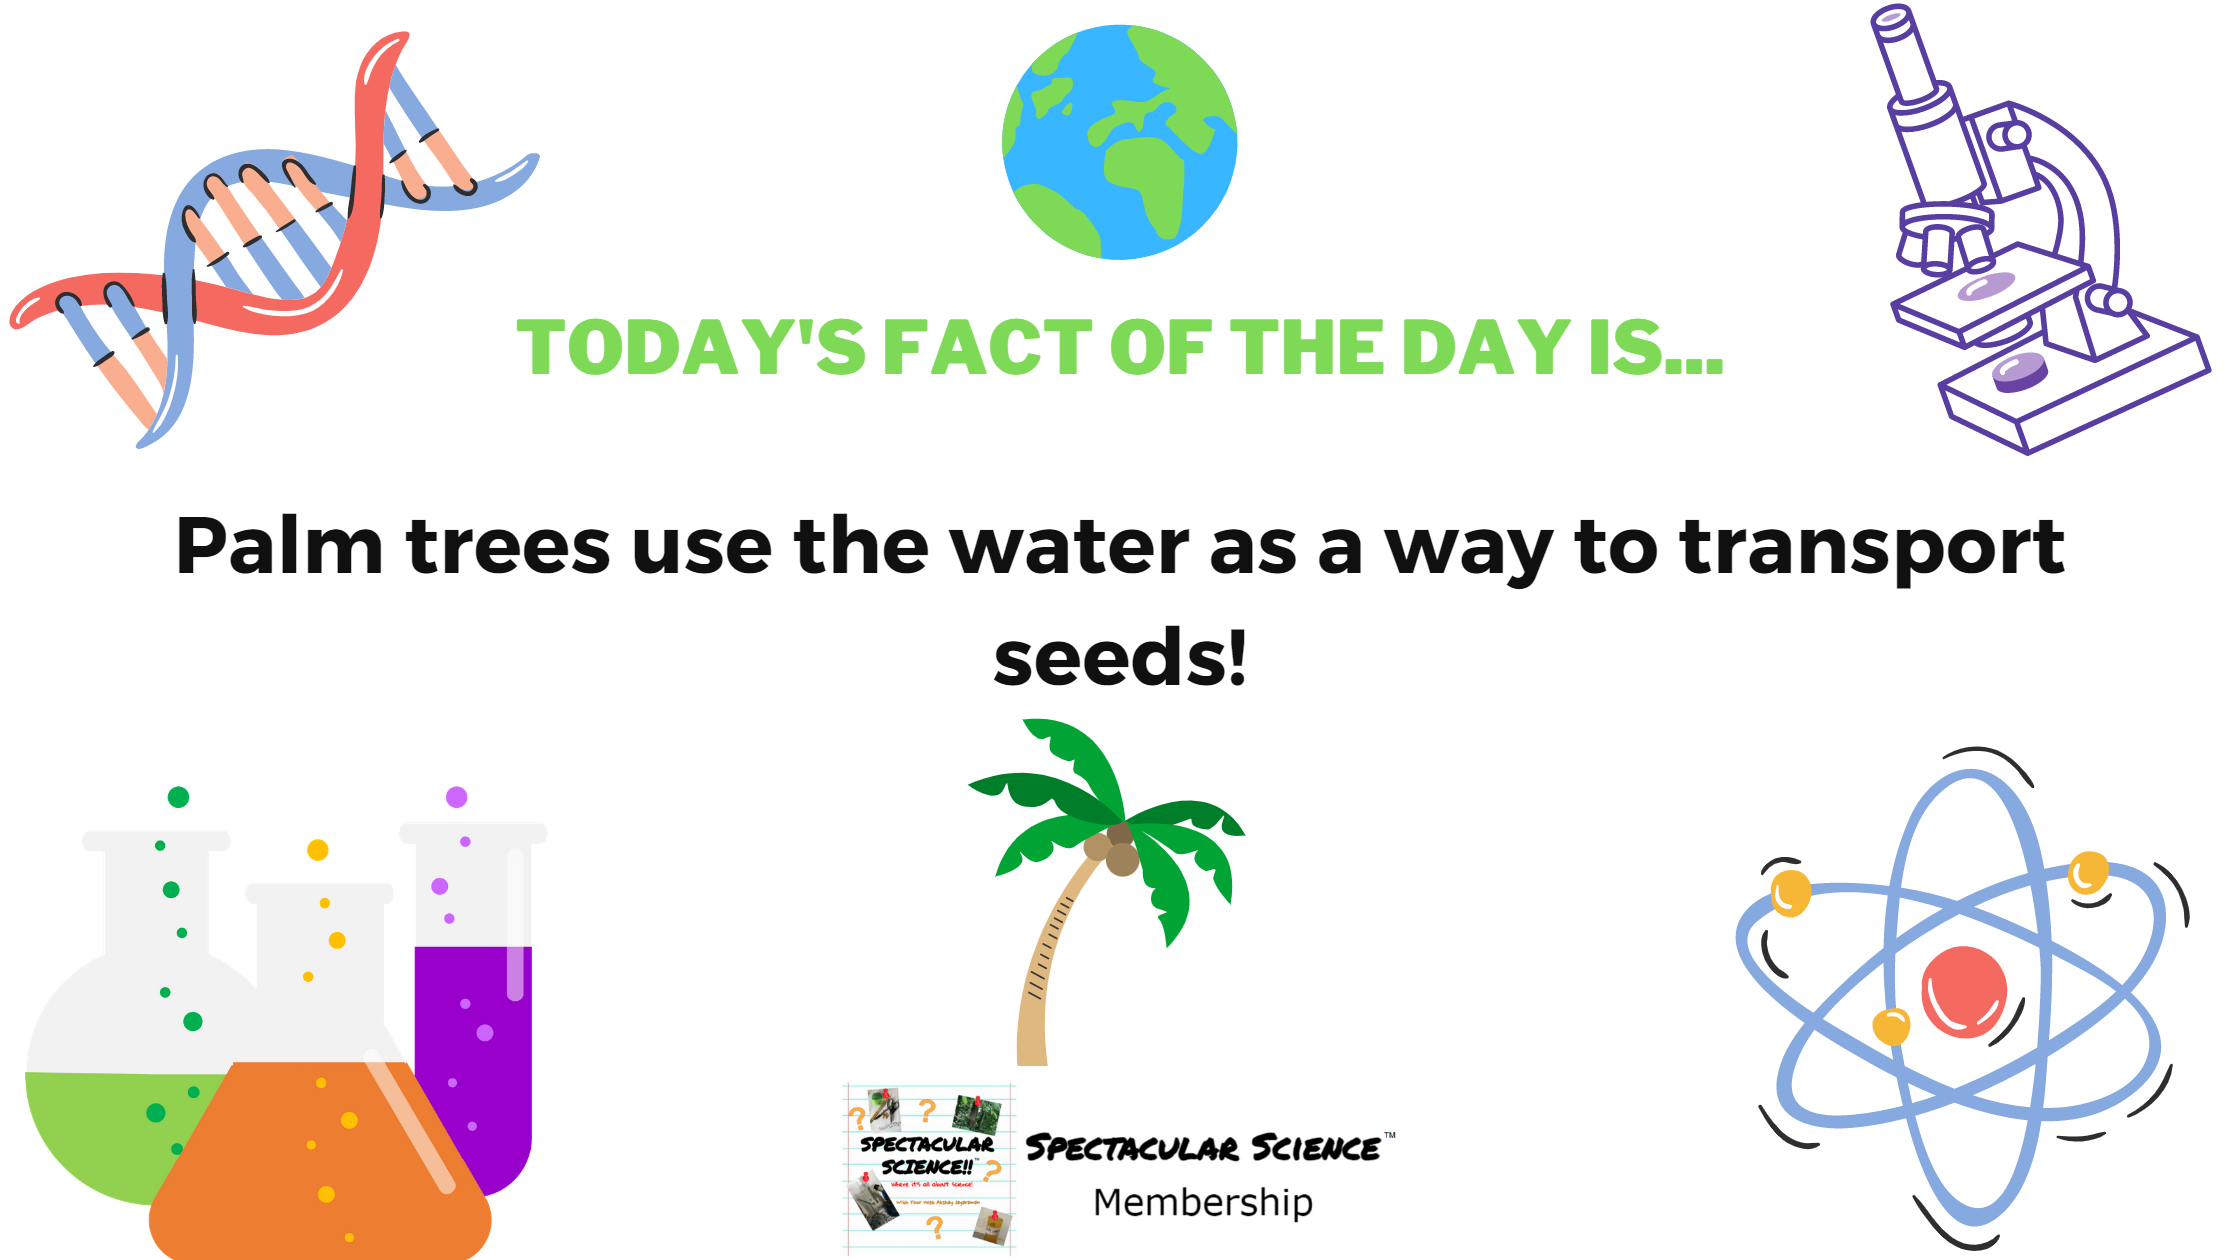 Fact of the Day Image January 3rd